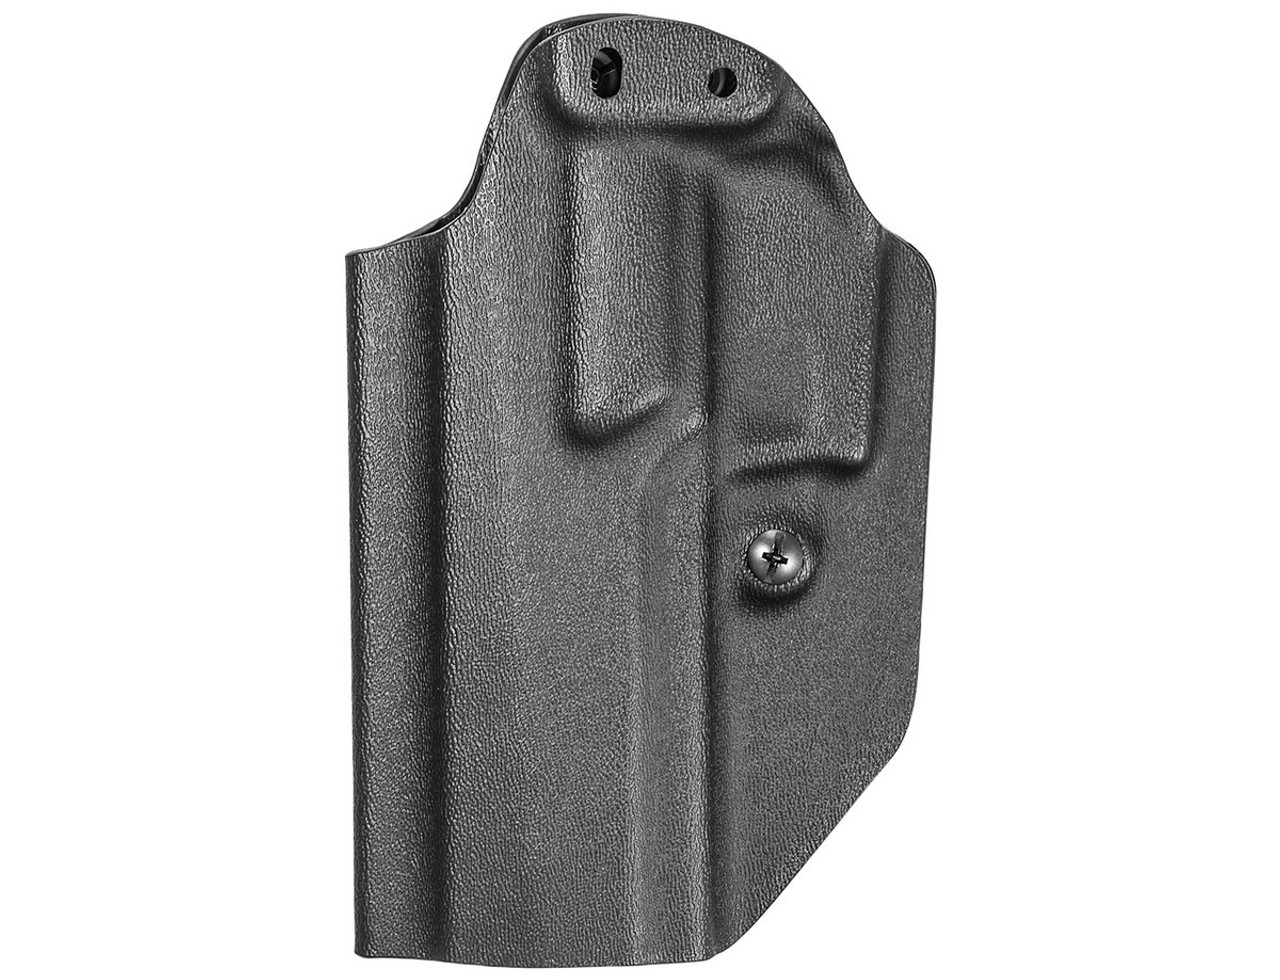 Mission First Tactical Sig Sauer P320 Full Size - Ambidextrous AIWB/OWB Holster